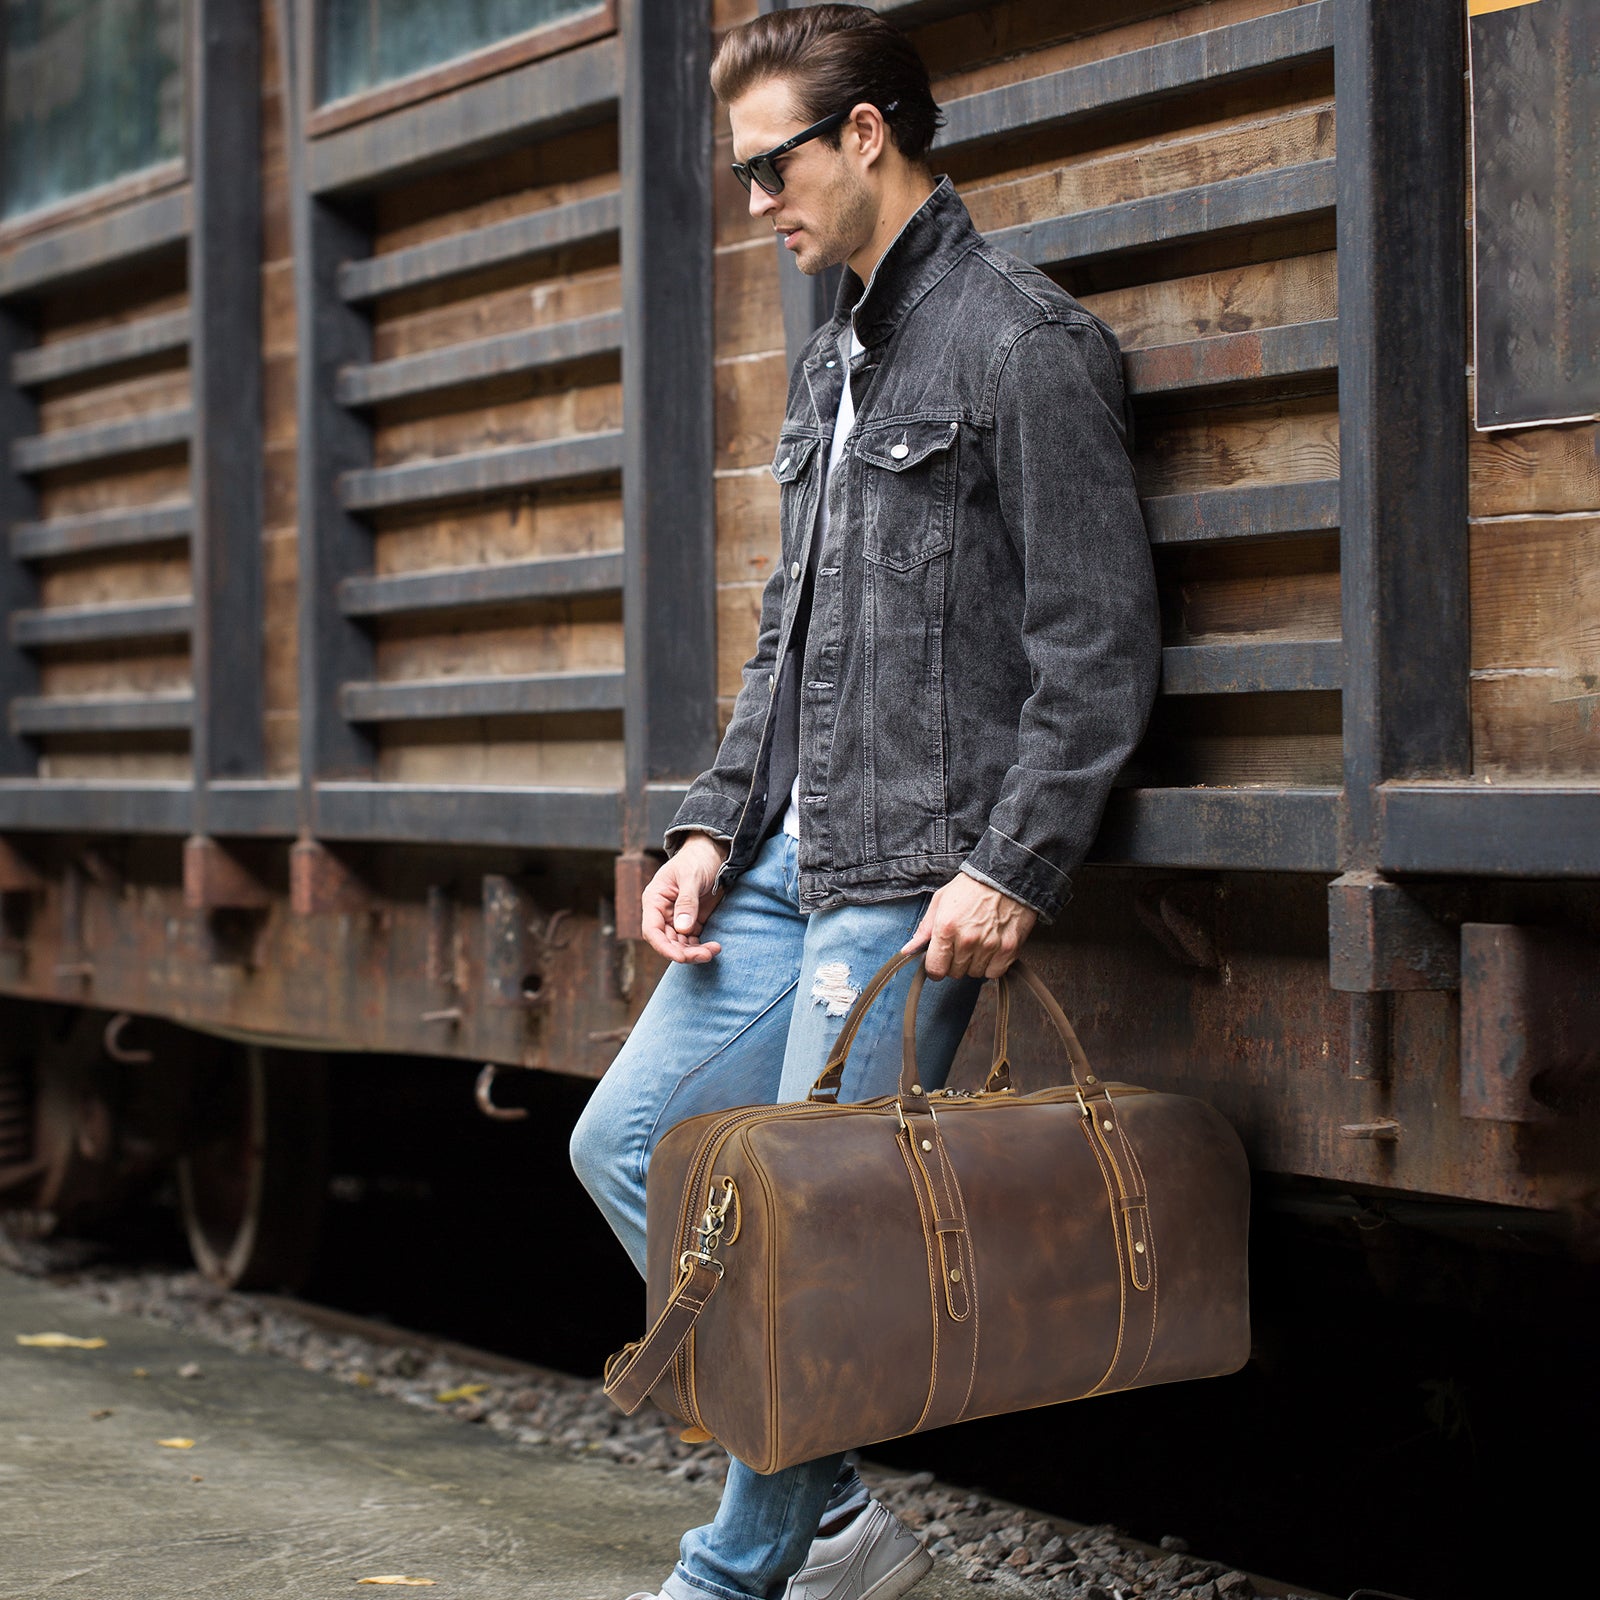 Travel Bags for Men, Leather Travel Bags